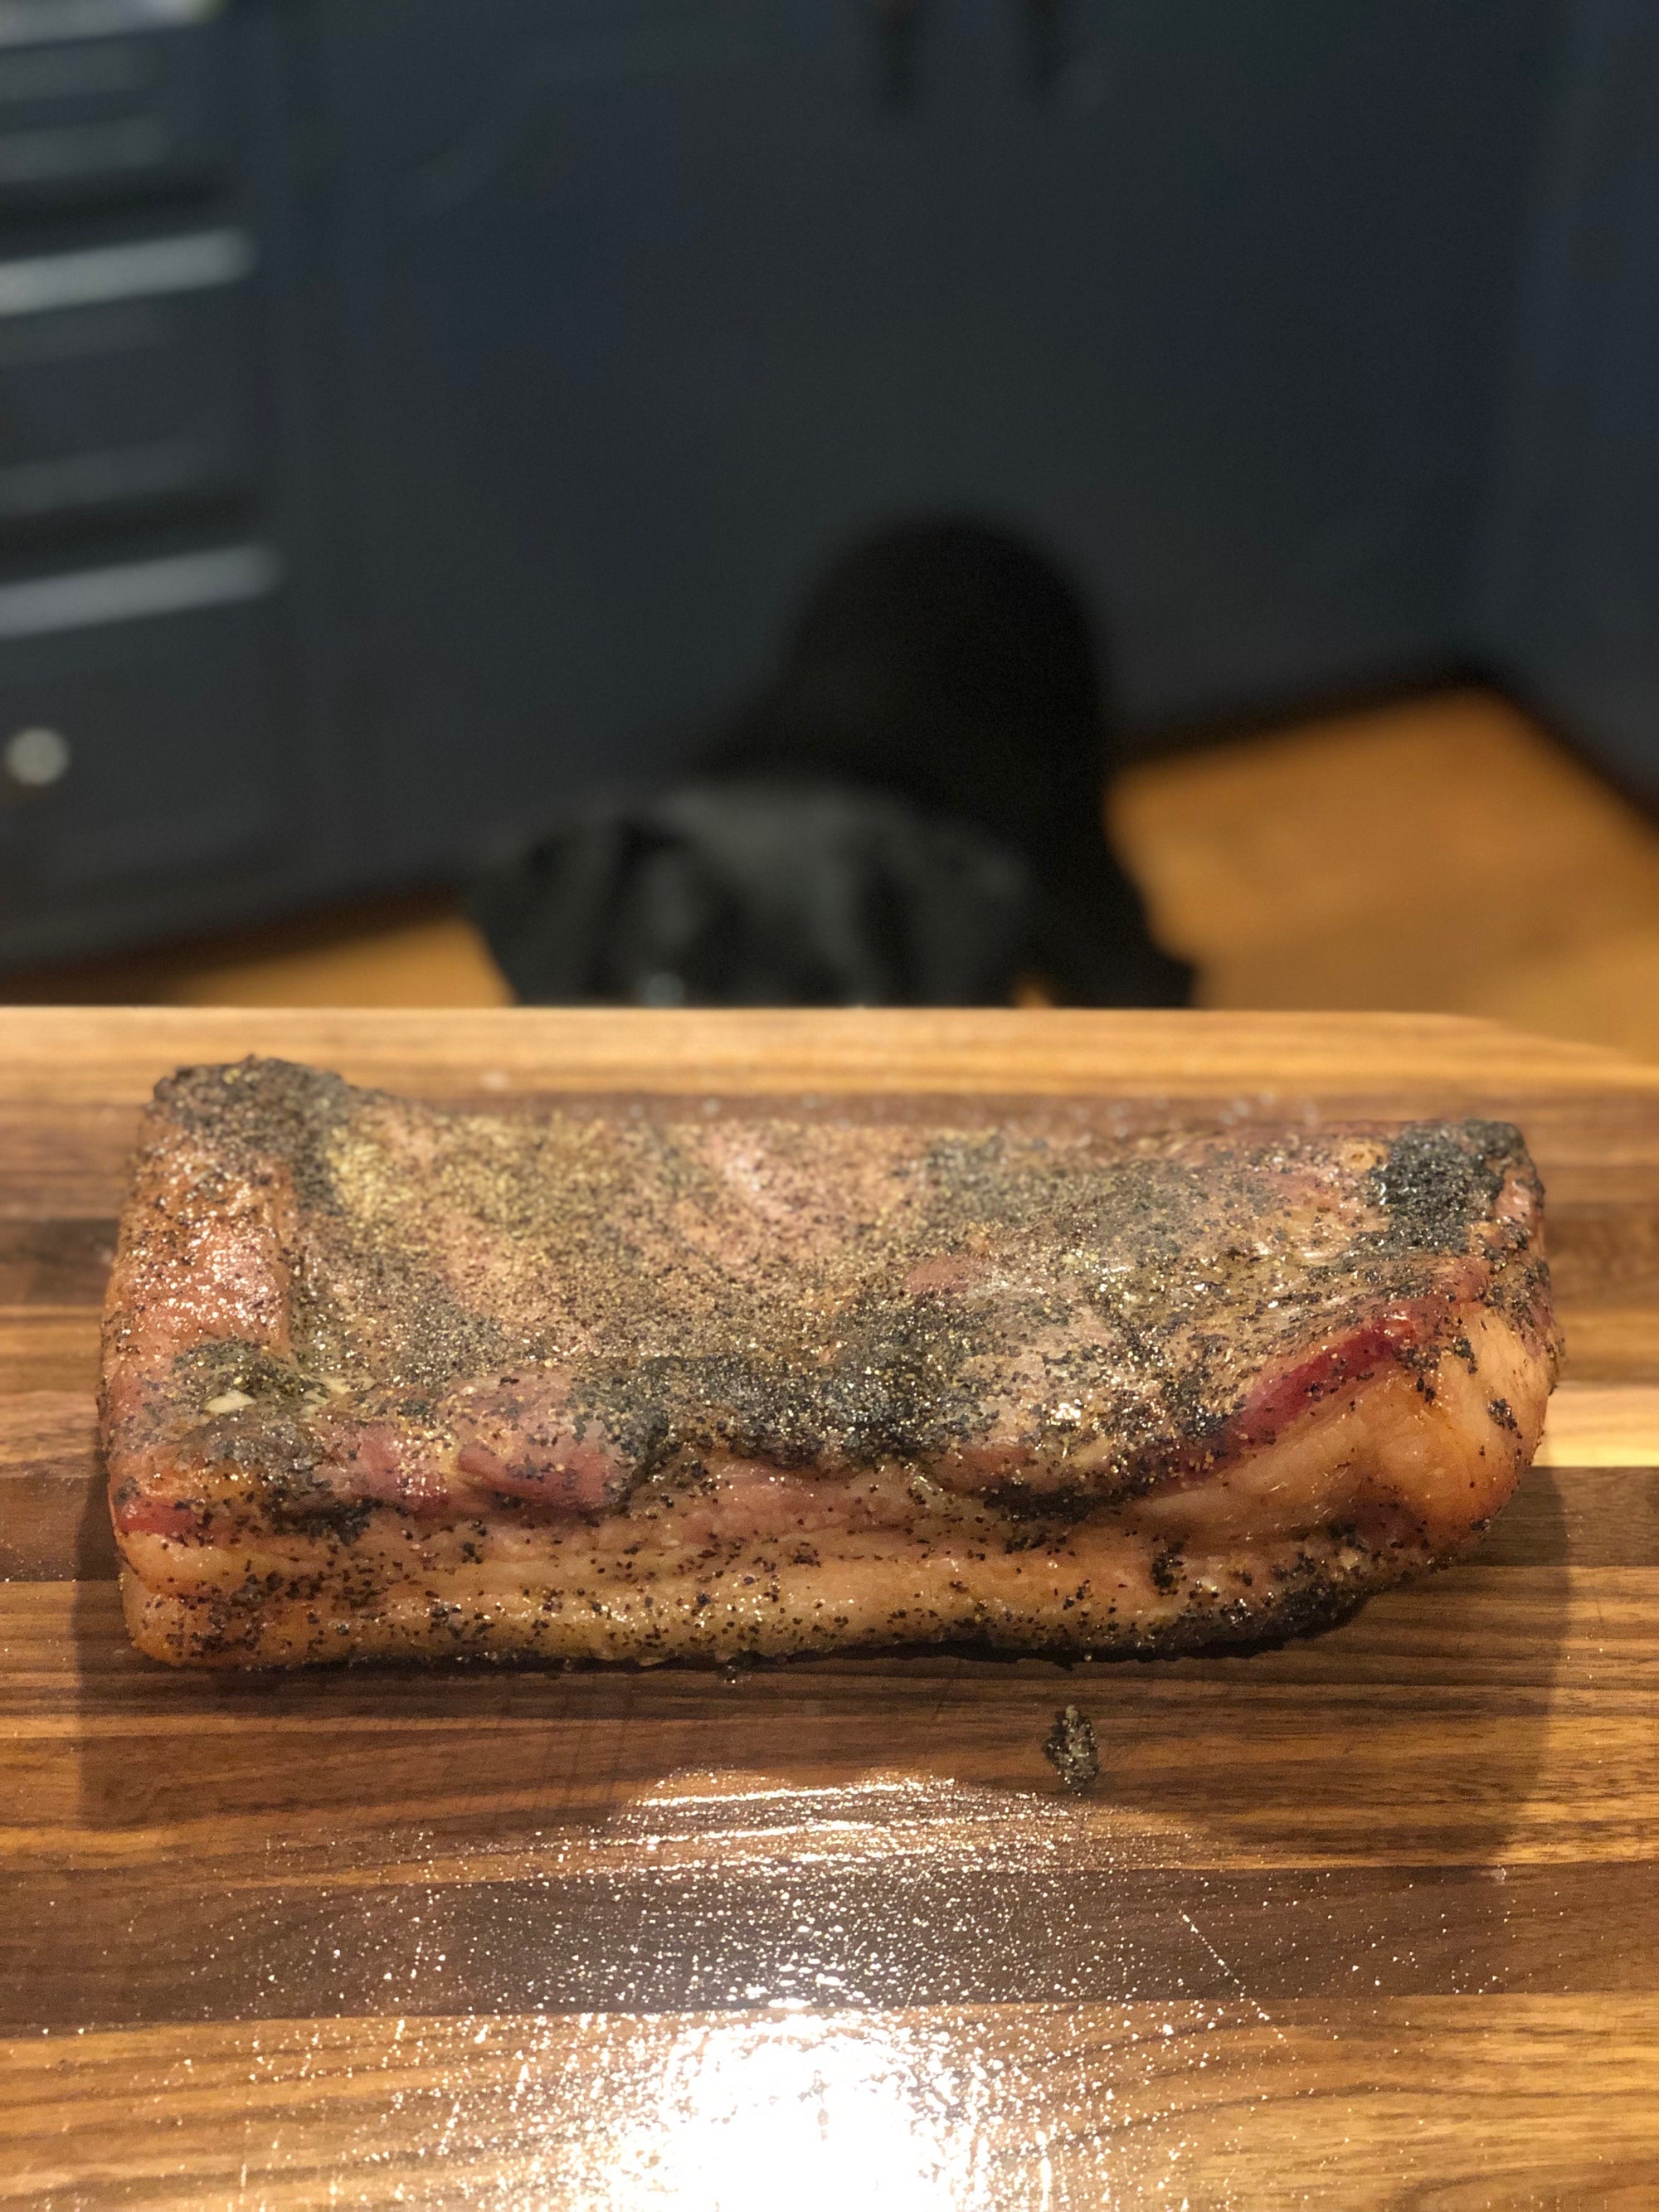 Homemade Bacon cured with Musket Powder